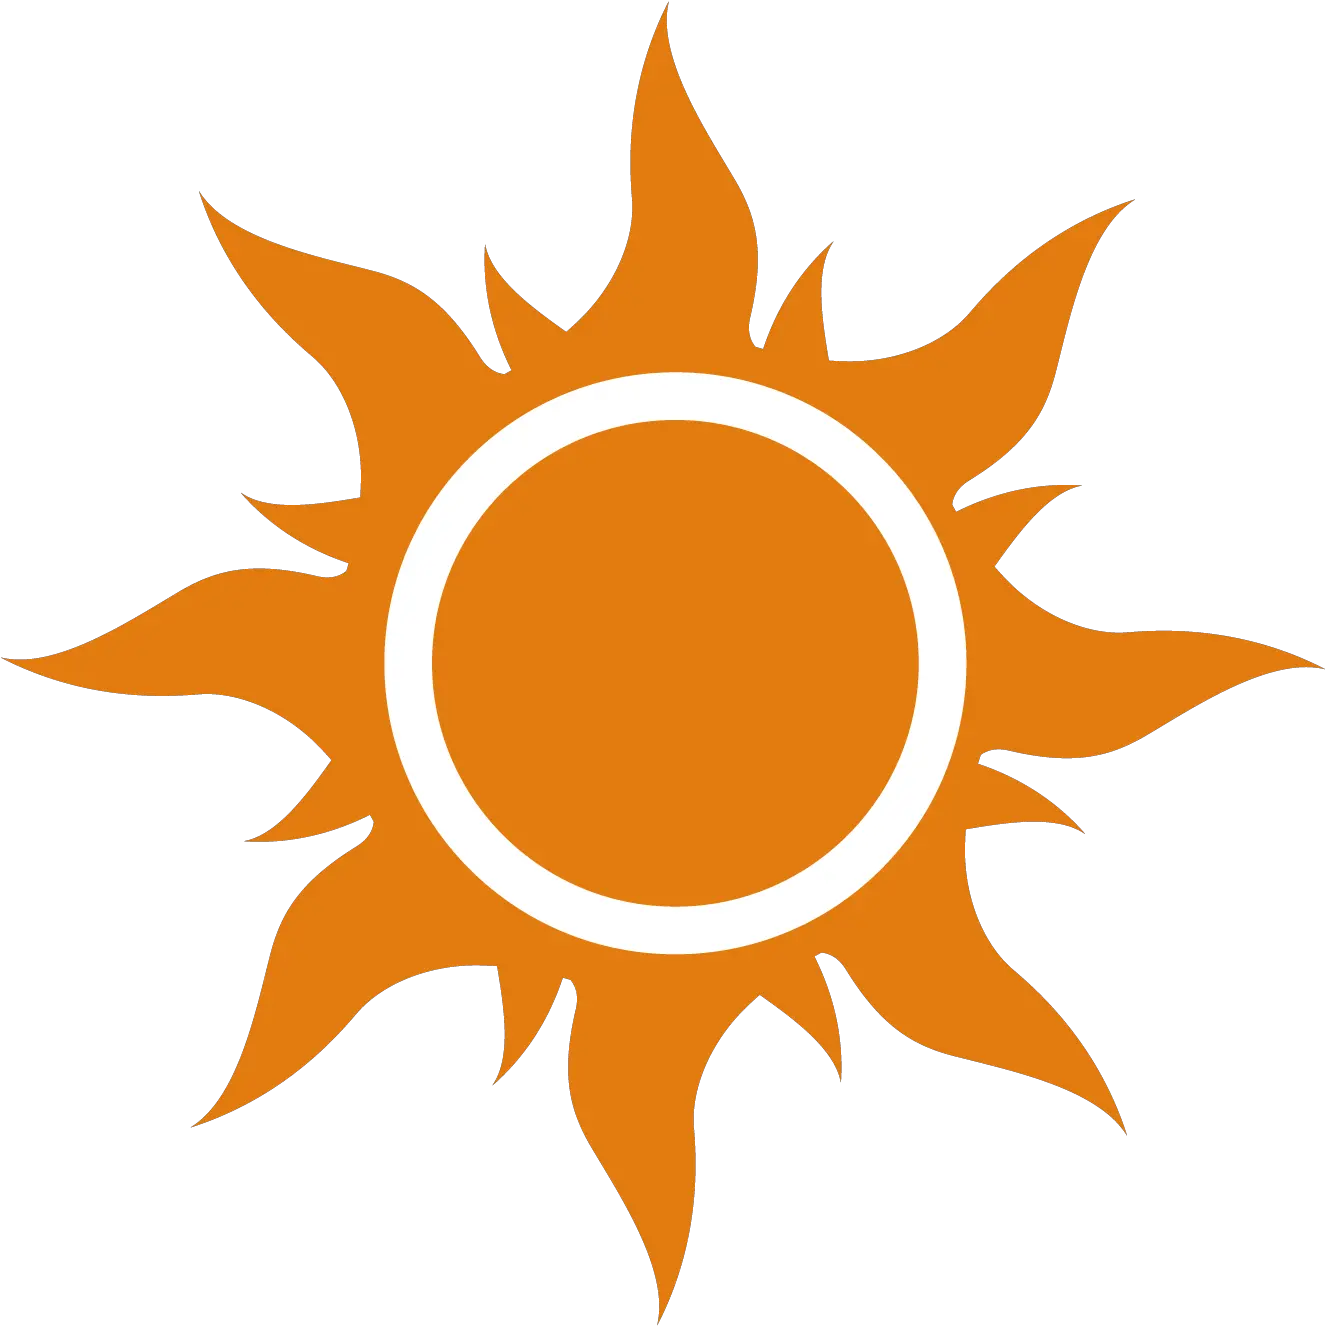 Download Hd China Icon Painted Sun Transprent Png Free Black Sun Silhouette China Icon